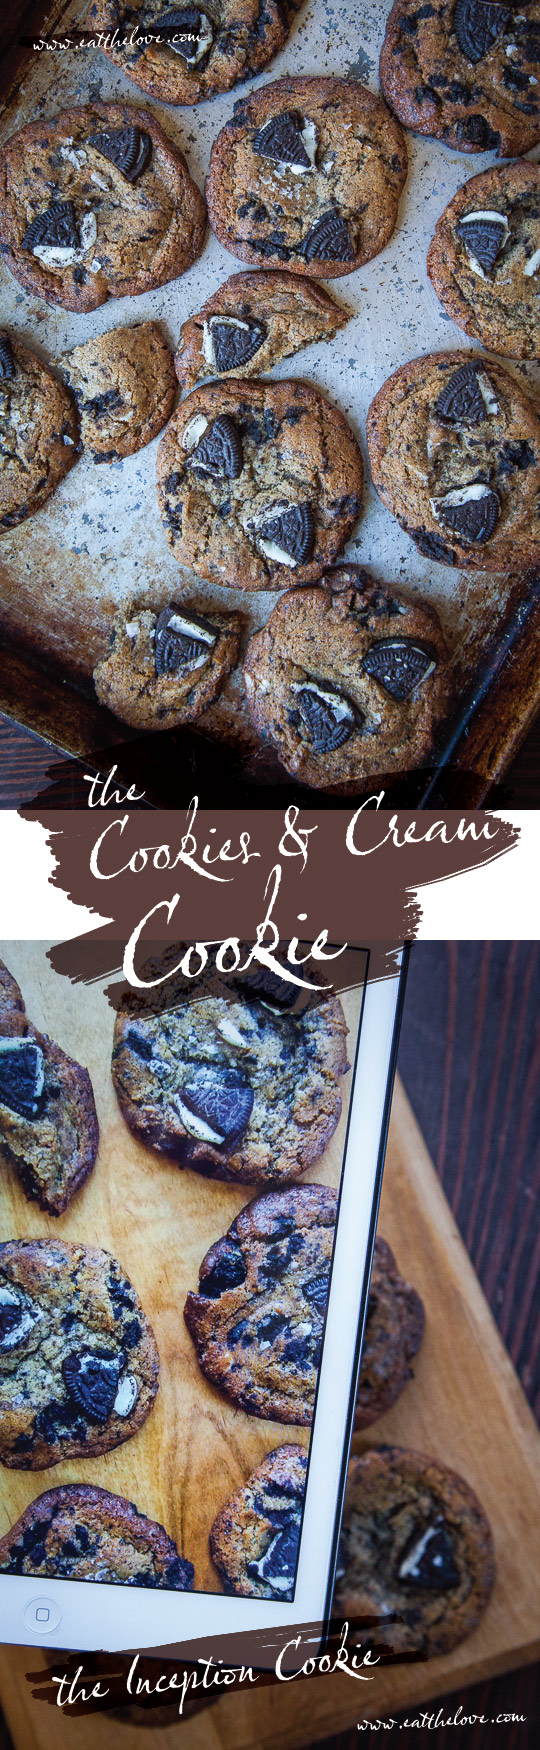 The Inception of Cookies! The Cookie and Cream Cookie. Photo and Recipe by Irvin Lin of Eat the Love.